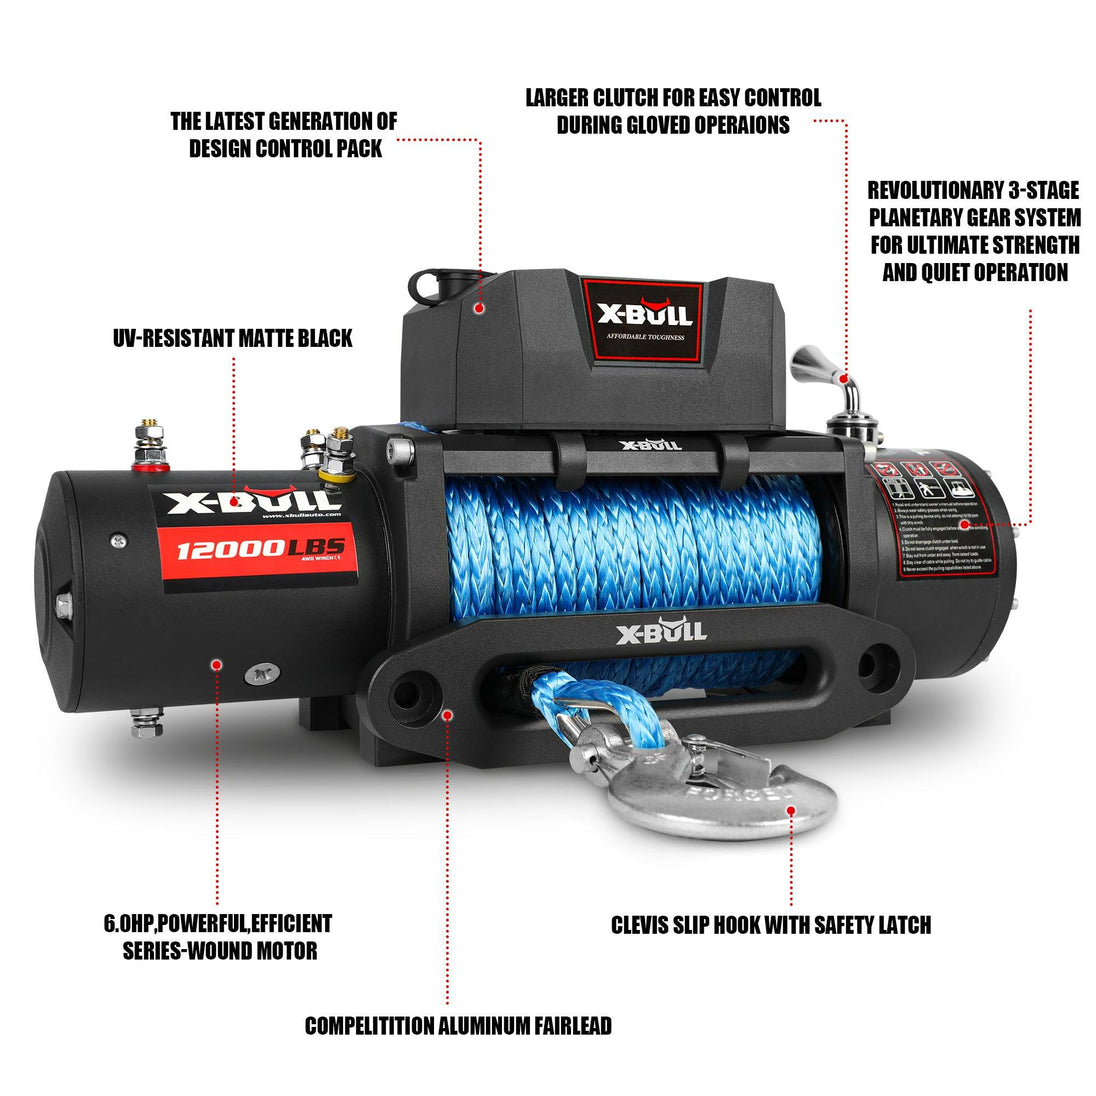 Buy X-BULL Electric Winch 12V 12000LBS/5454kg 26M Synthetic Rope Wireless Remote 4WD 4X4 discounted | Products On Sale Australia